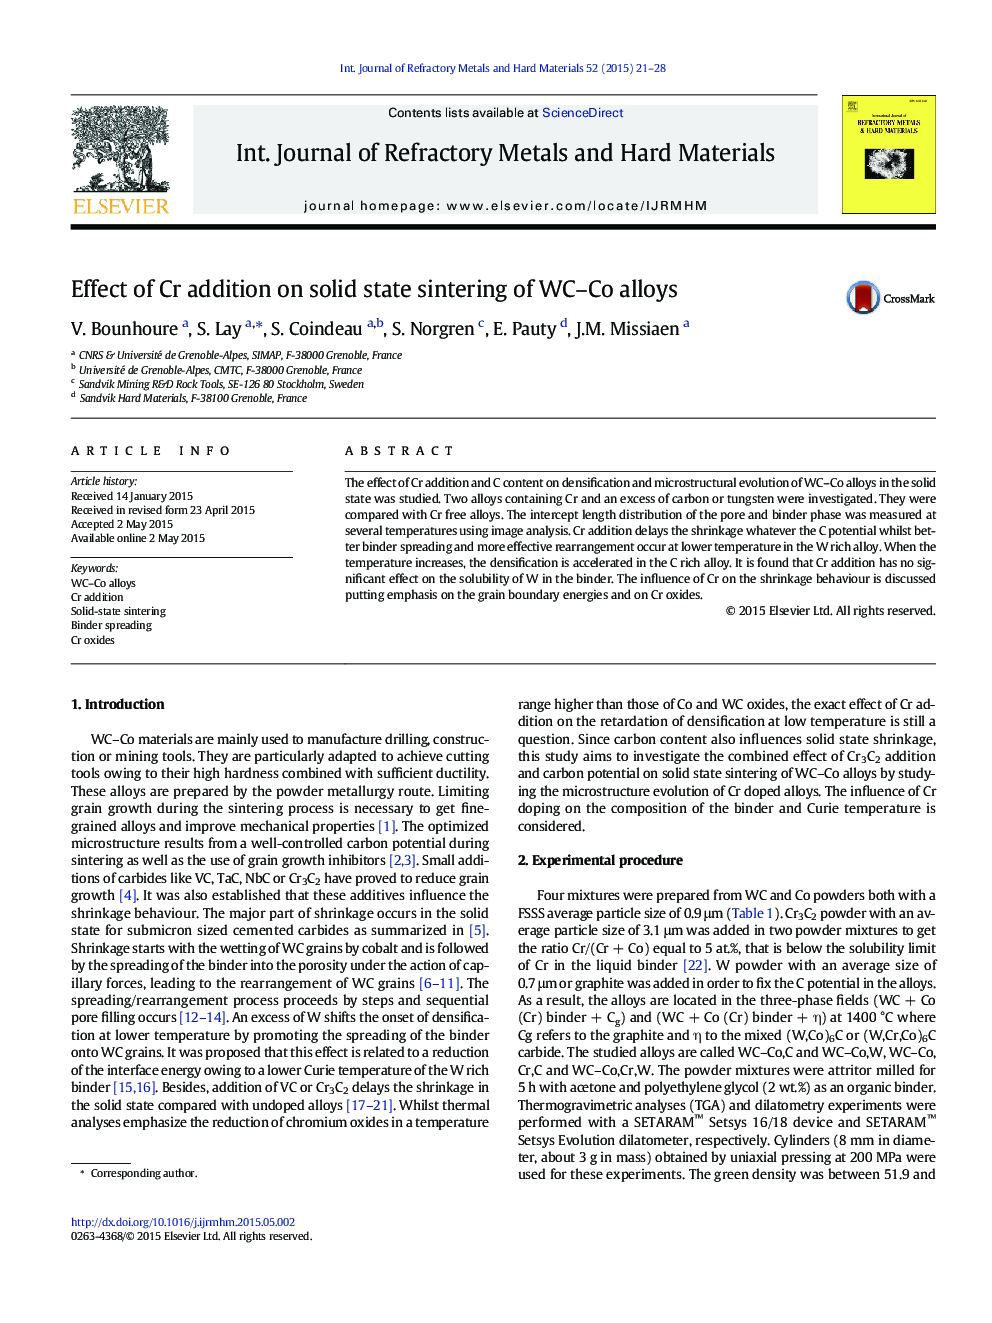 Effect of Cr addition on solid state sintering of WC–Co alloys